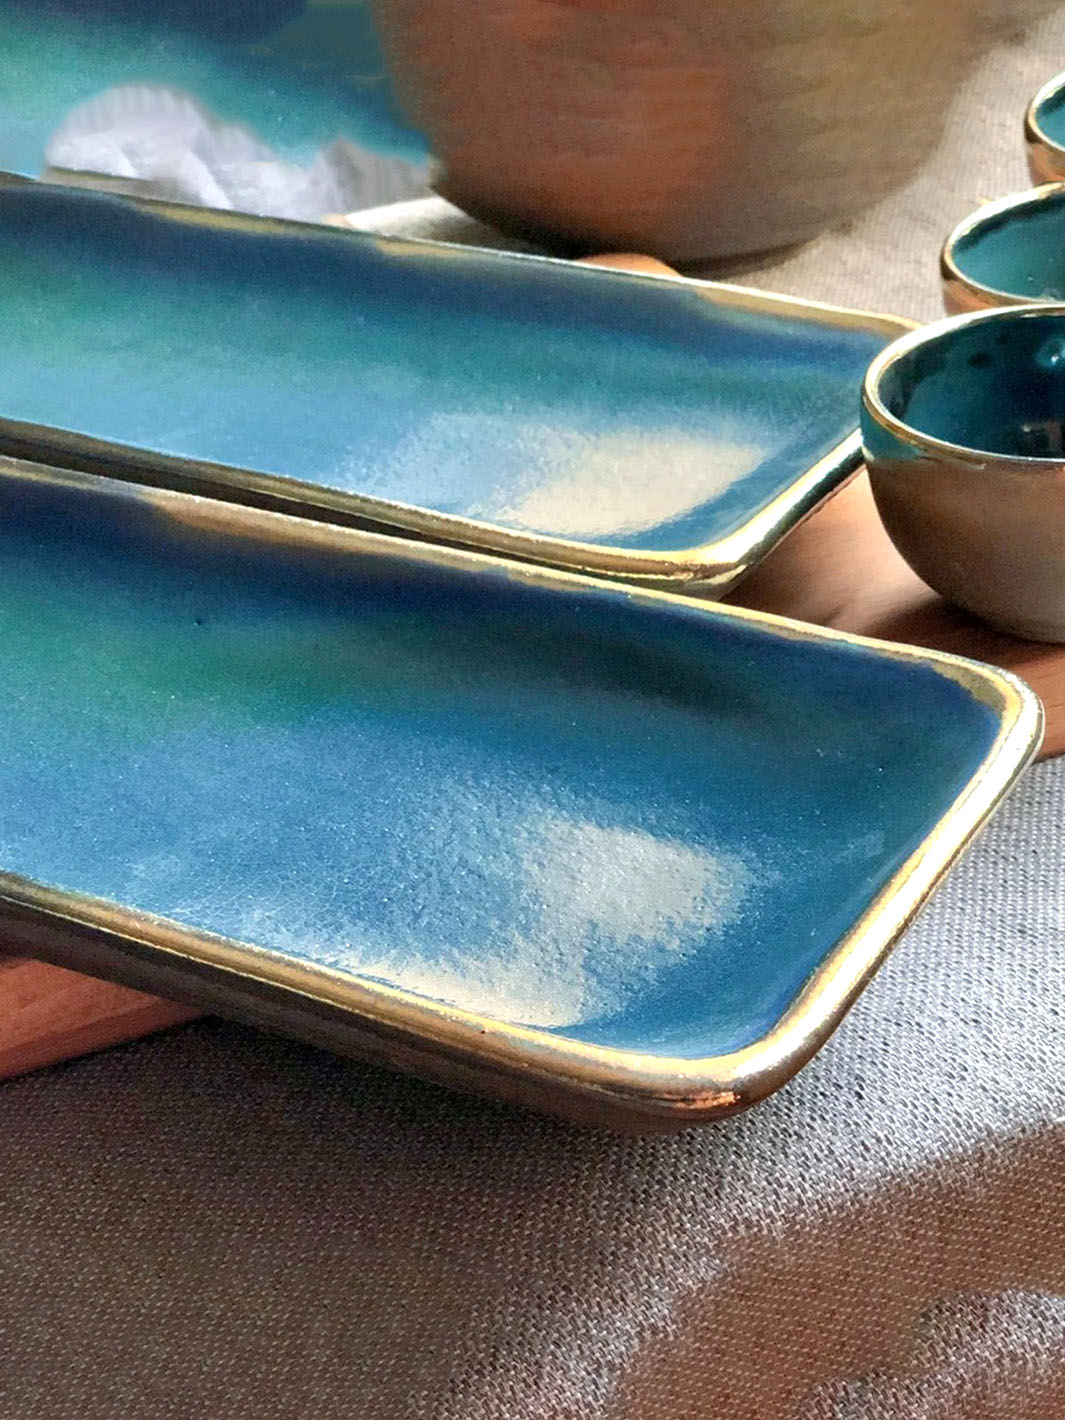 Handcrafted Artistic Ceramic Sushi Plate Set in Peacock Blue Deco Plates DCB0015-9